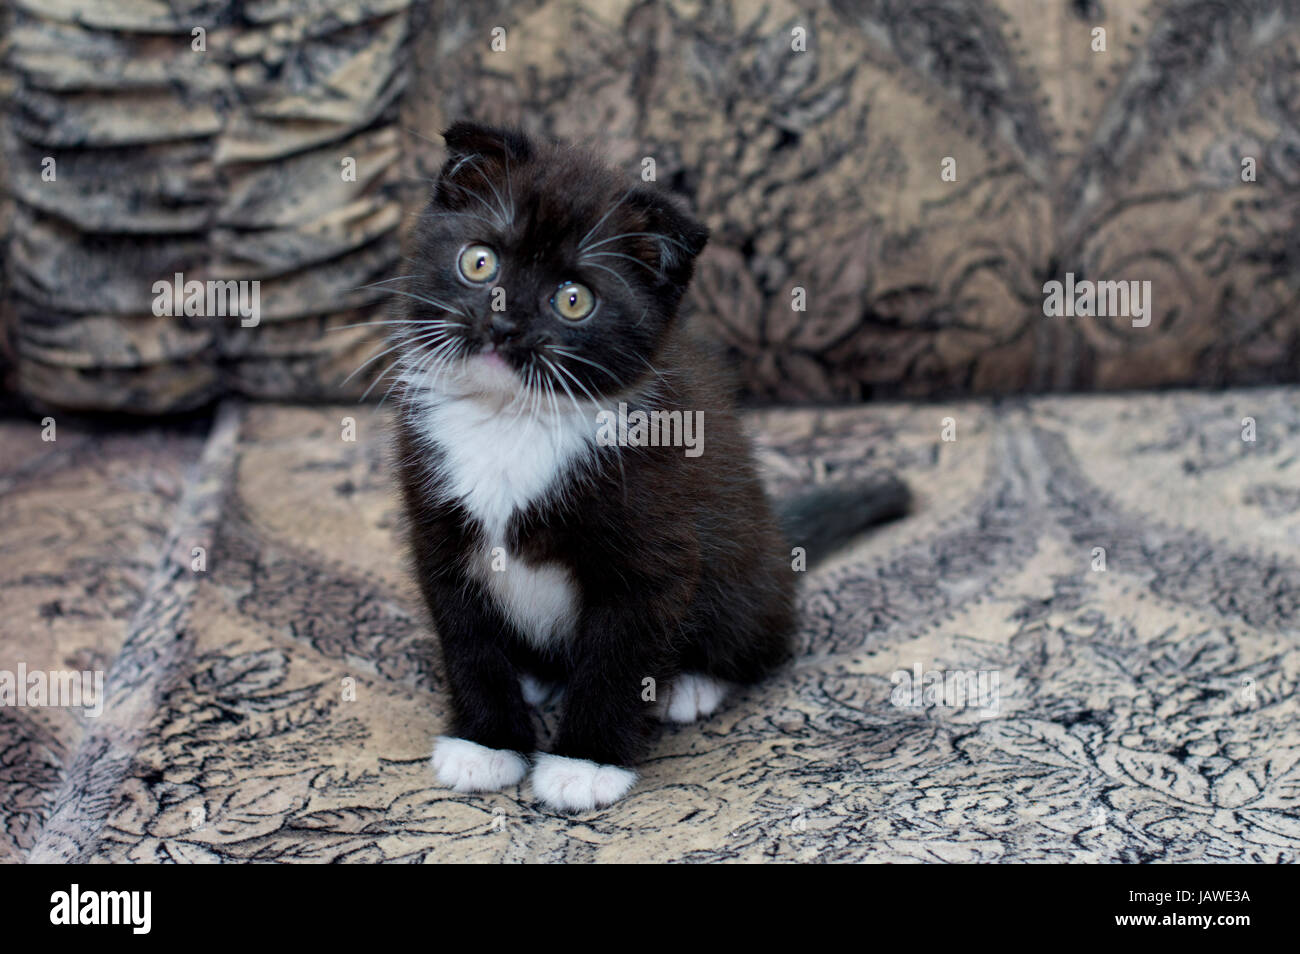 brown bicolor Scottish kitten sitting on the couch, the theme of beautiful kittens and cats Stock Photo